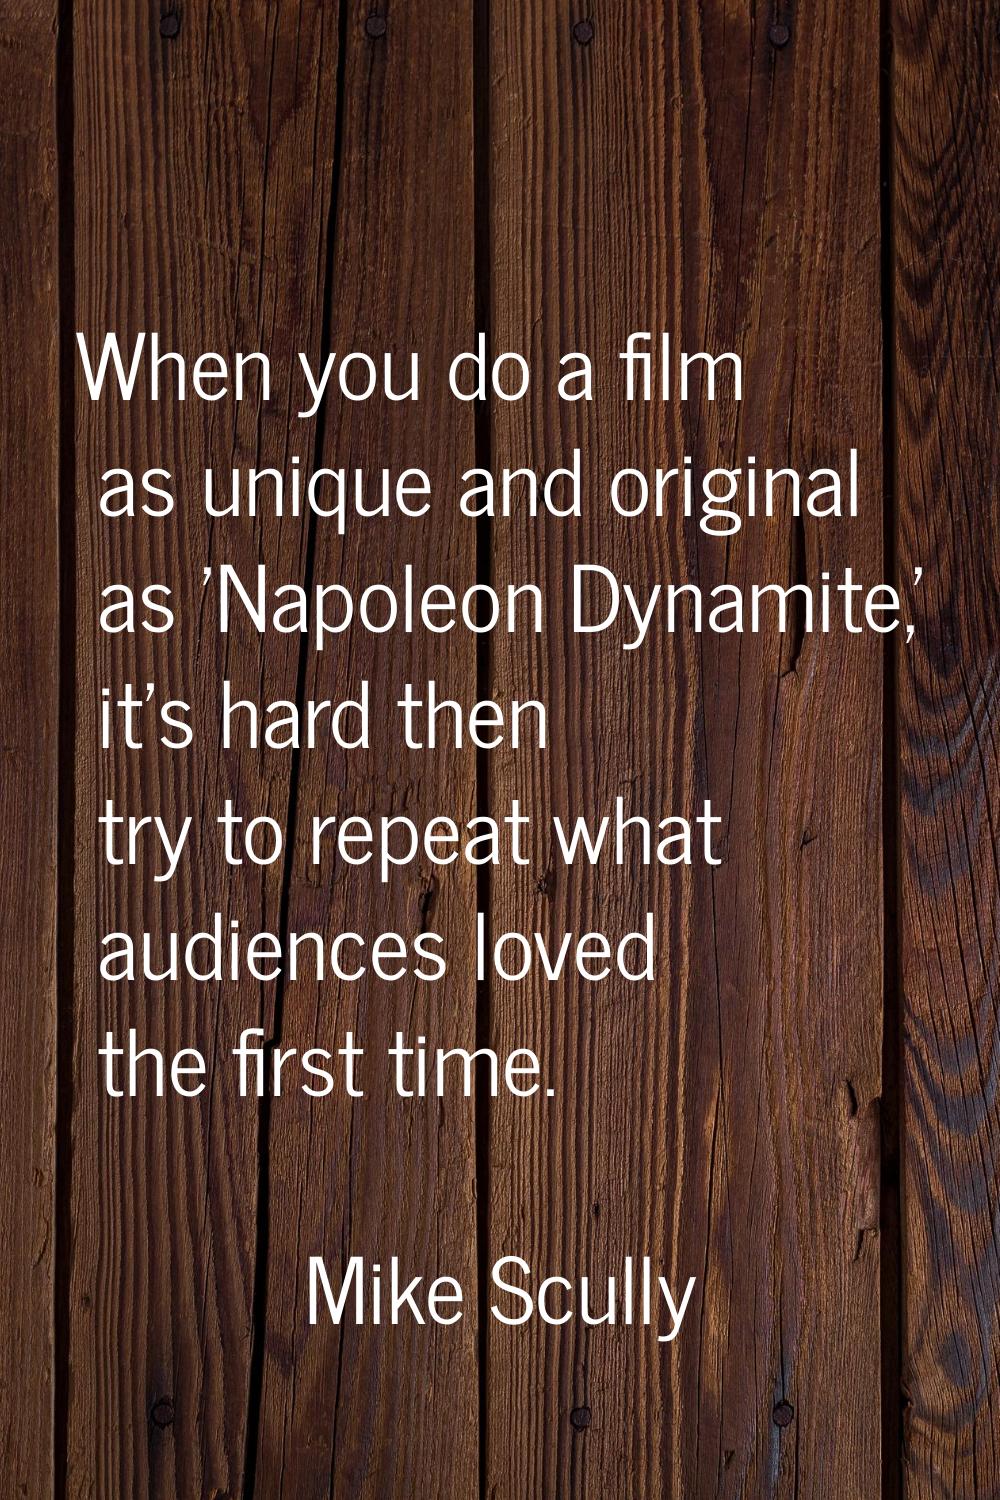 When you do a film as unique and original as 'Napoleon Dynamite,' it's hard then try to repeat what